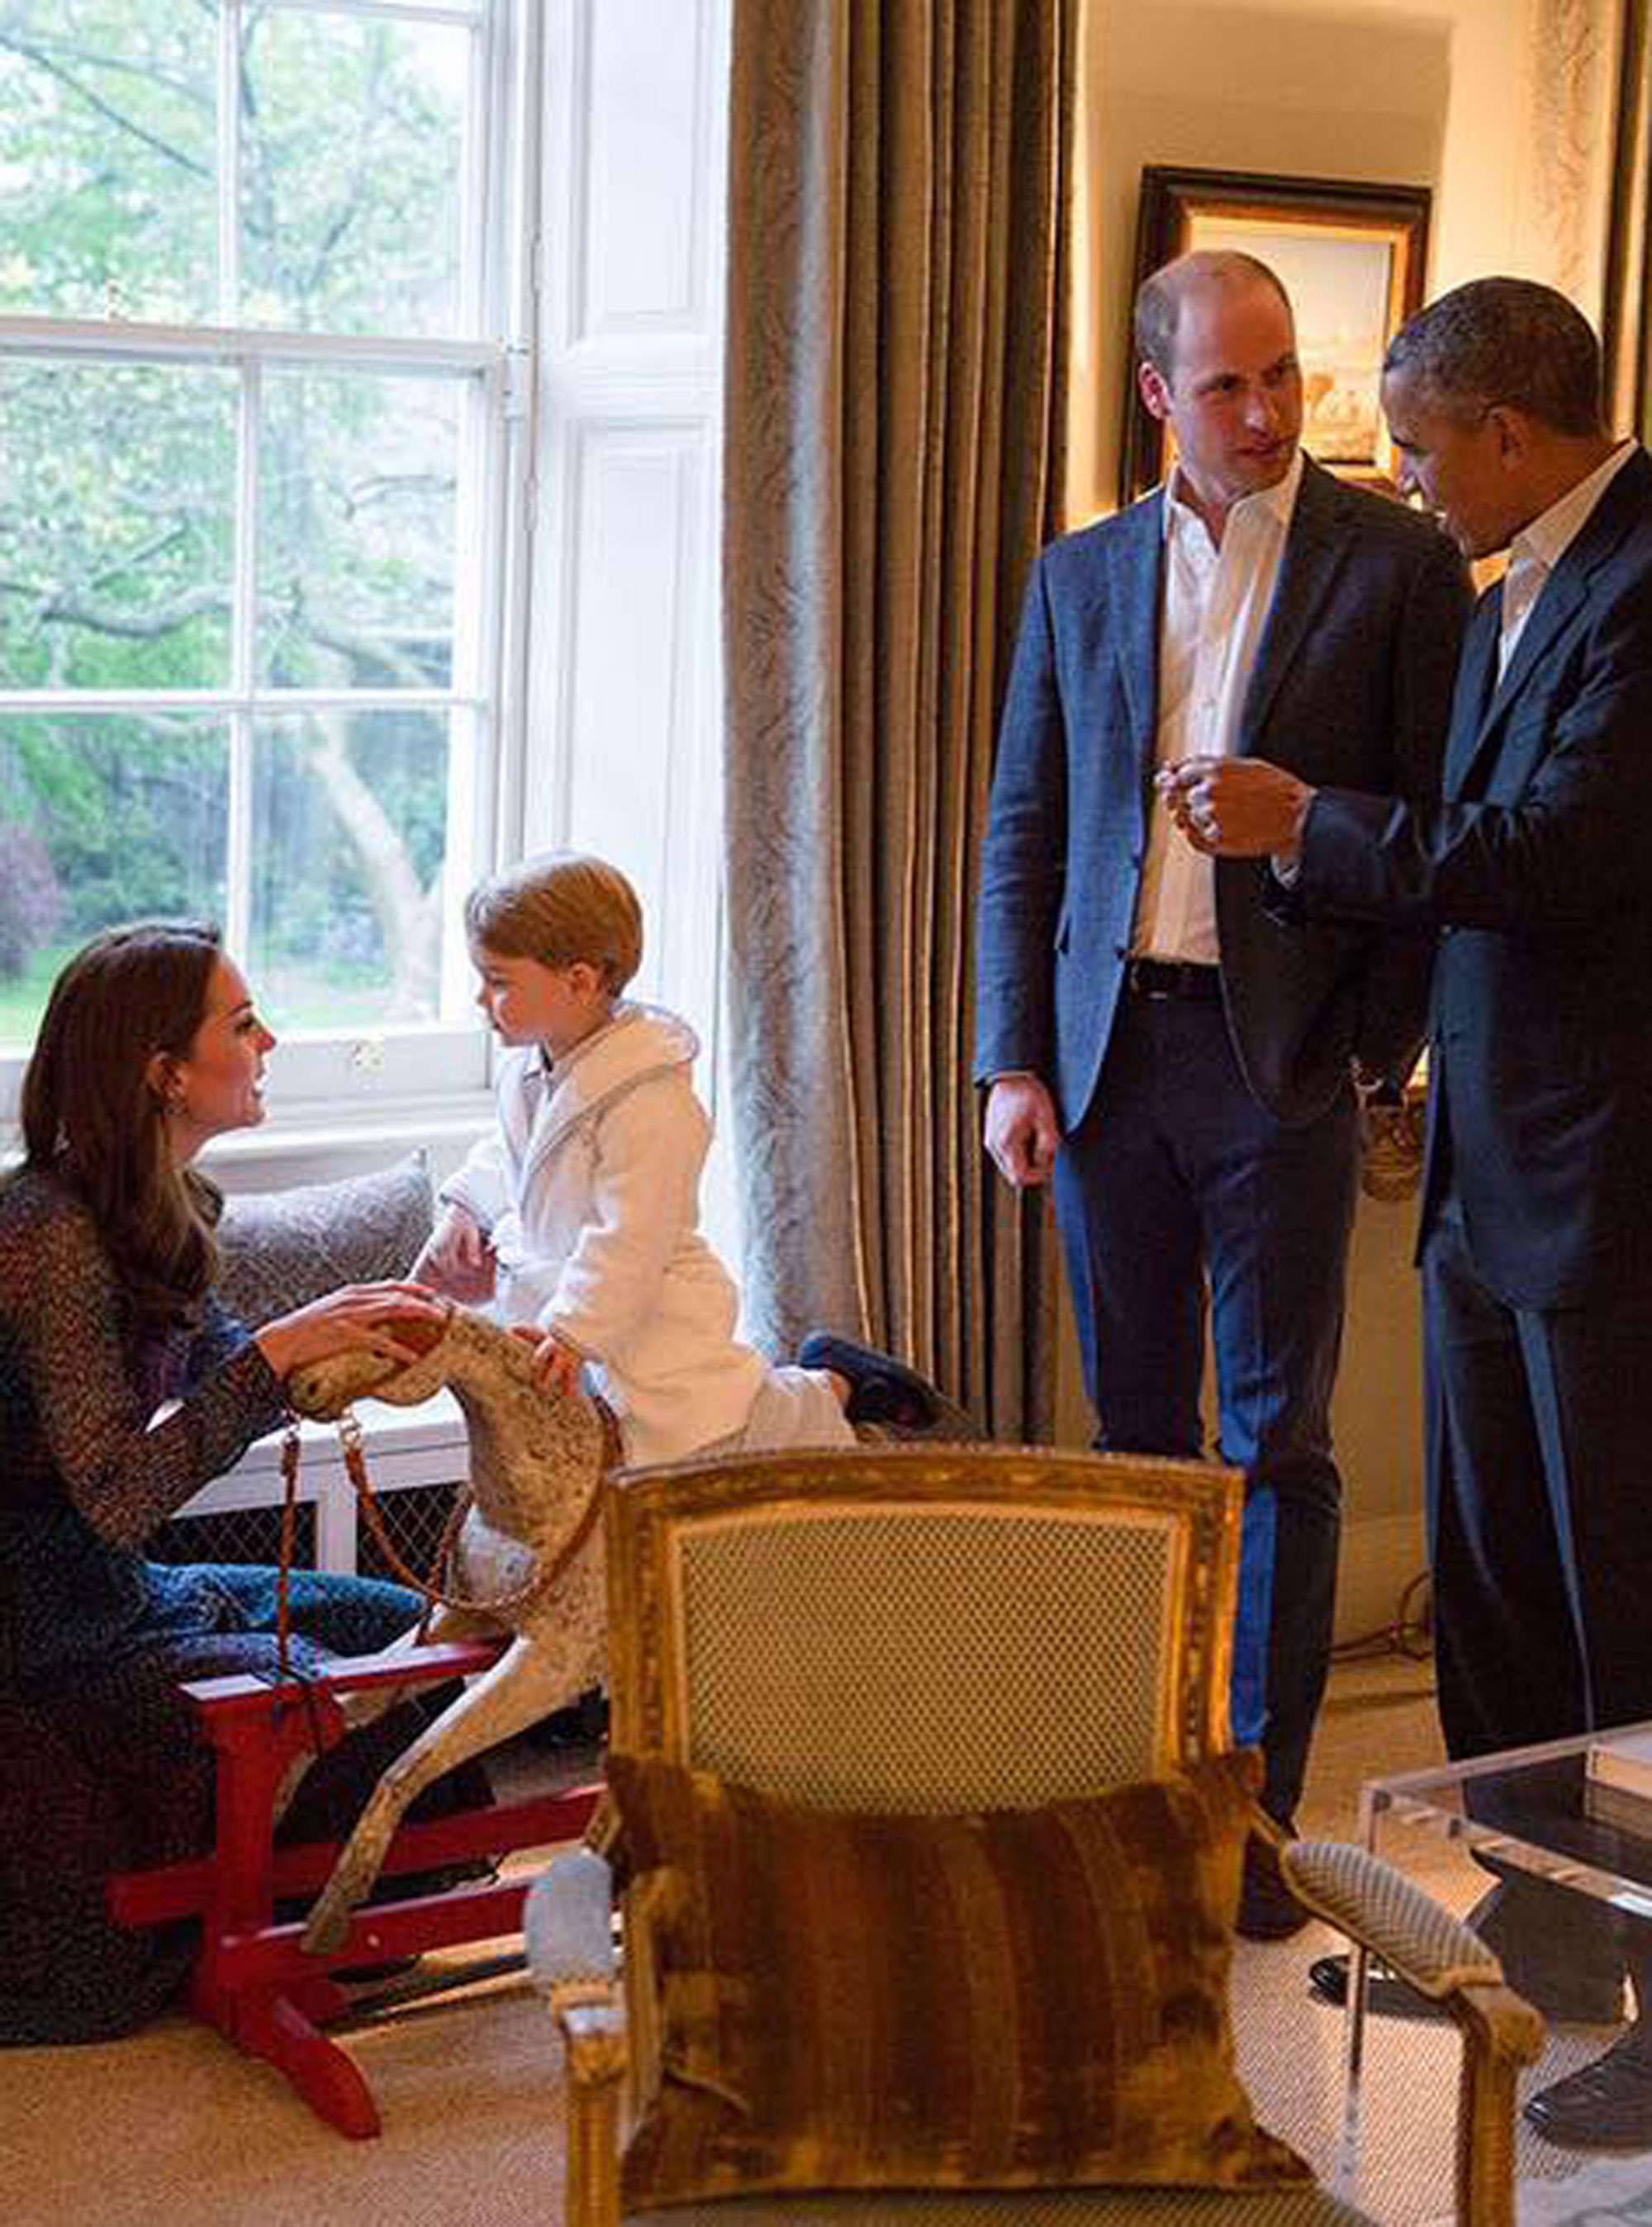 When the adorable Prince George greeted Barack Obama in 